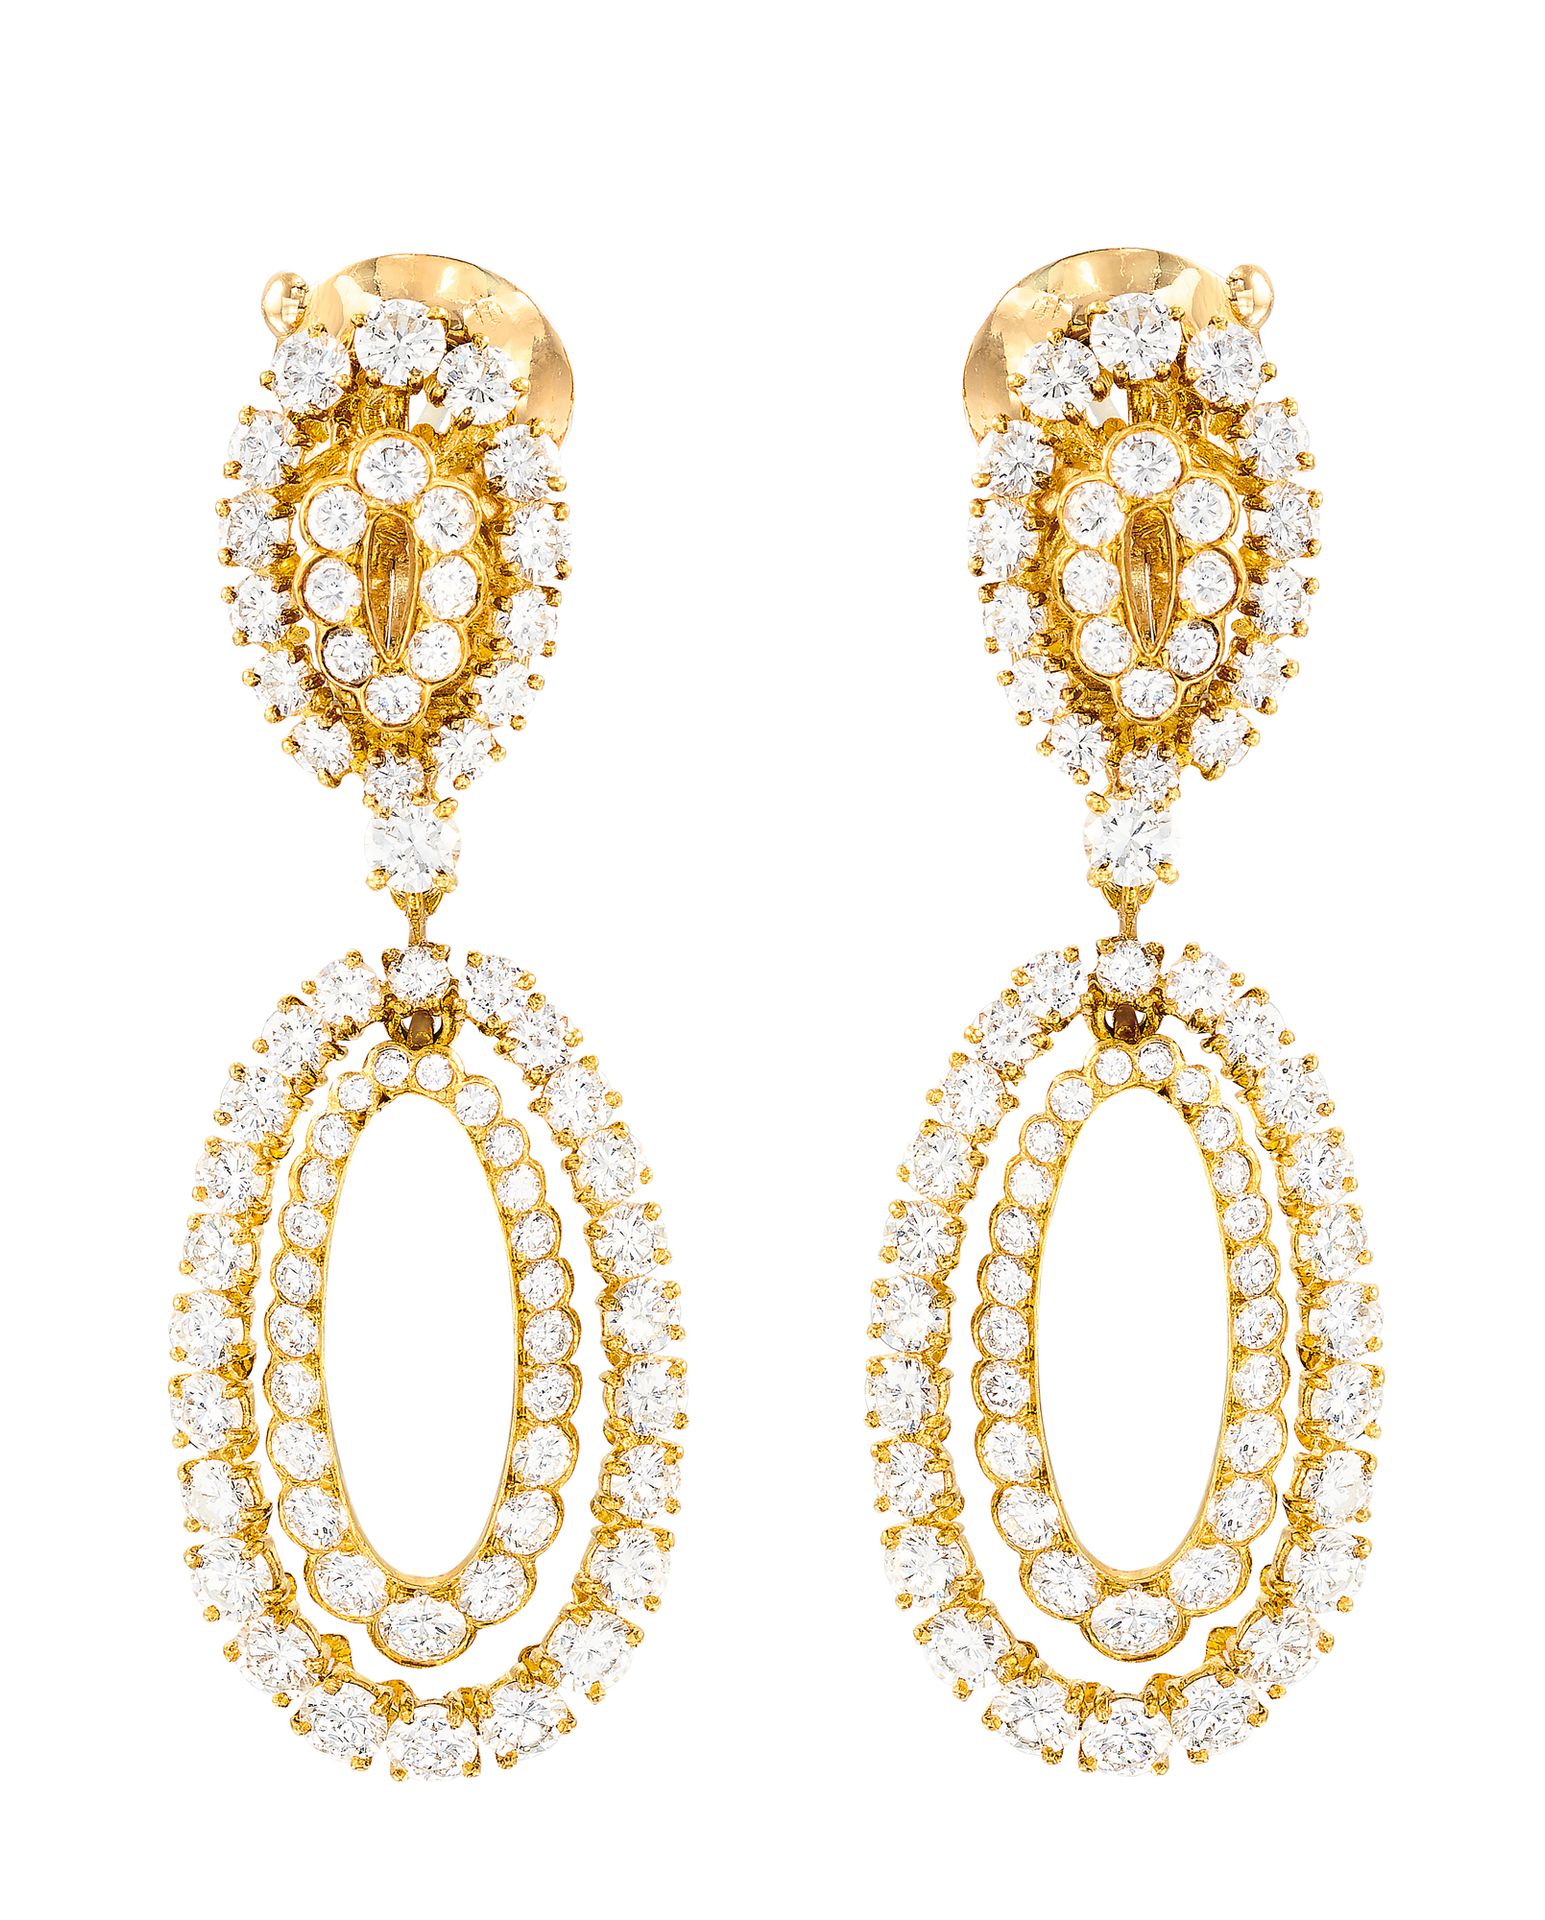 VAN CLEEF & ARPELS Superb hinged earrings with two detachable parts, set in yell&hellip;